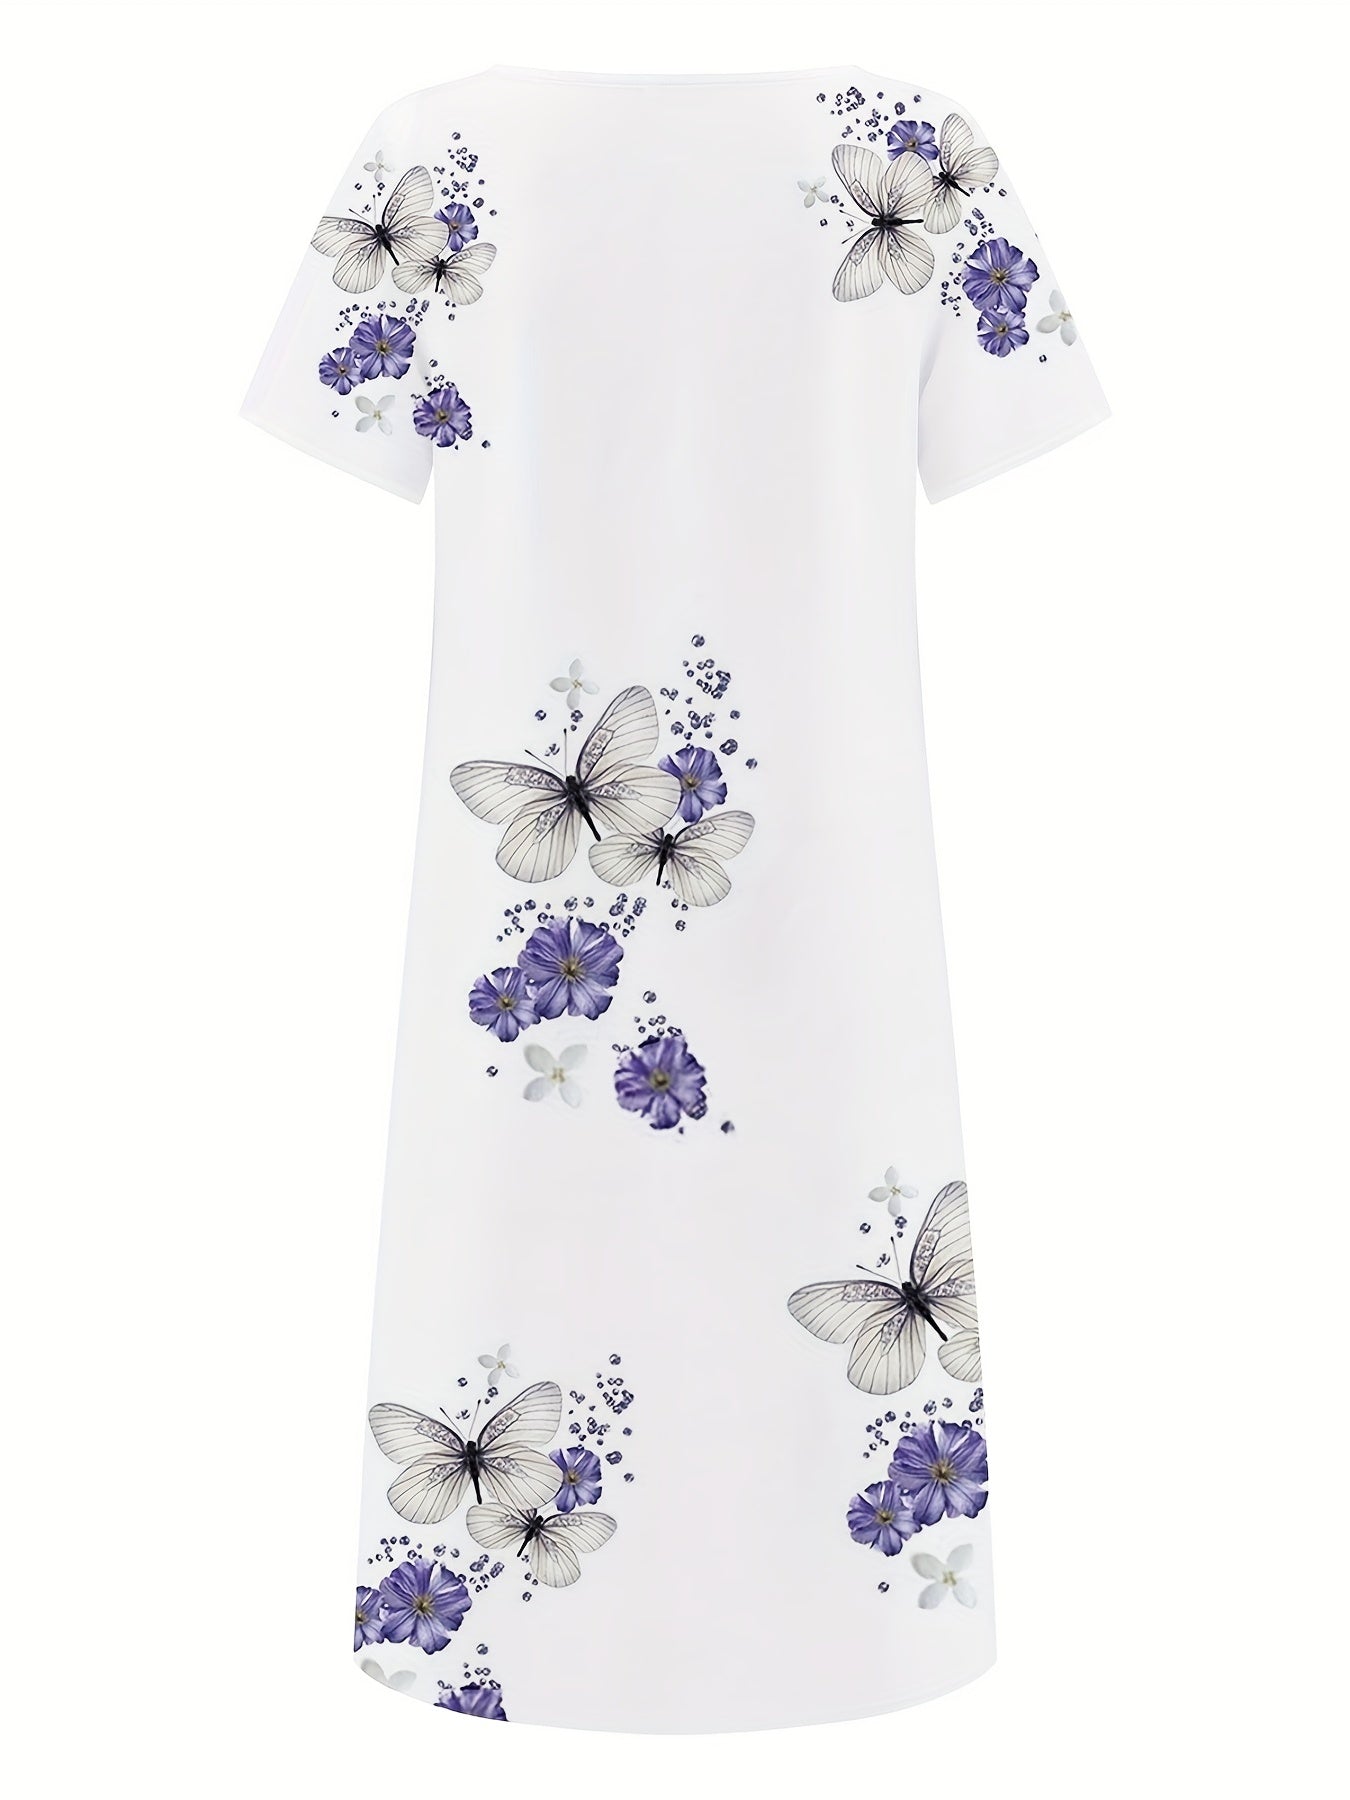 「binfenxie」Floral & Butterfly Print V Neck Dress, Casual Button Front Short Sleeve Dress For Spring & Summer, Women's Clothing